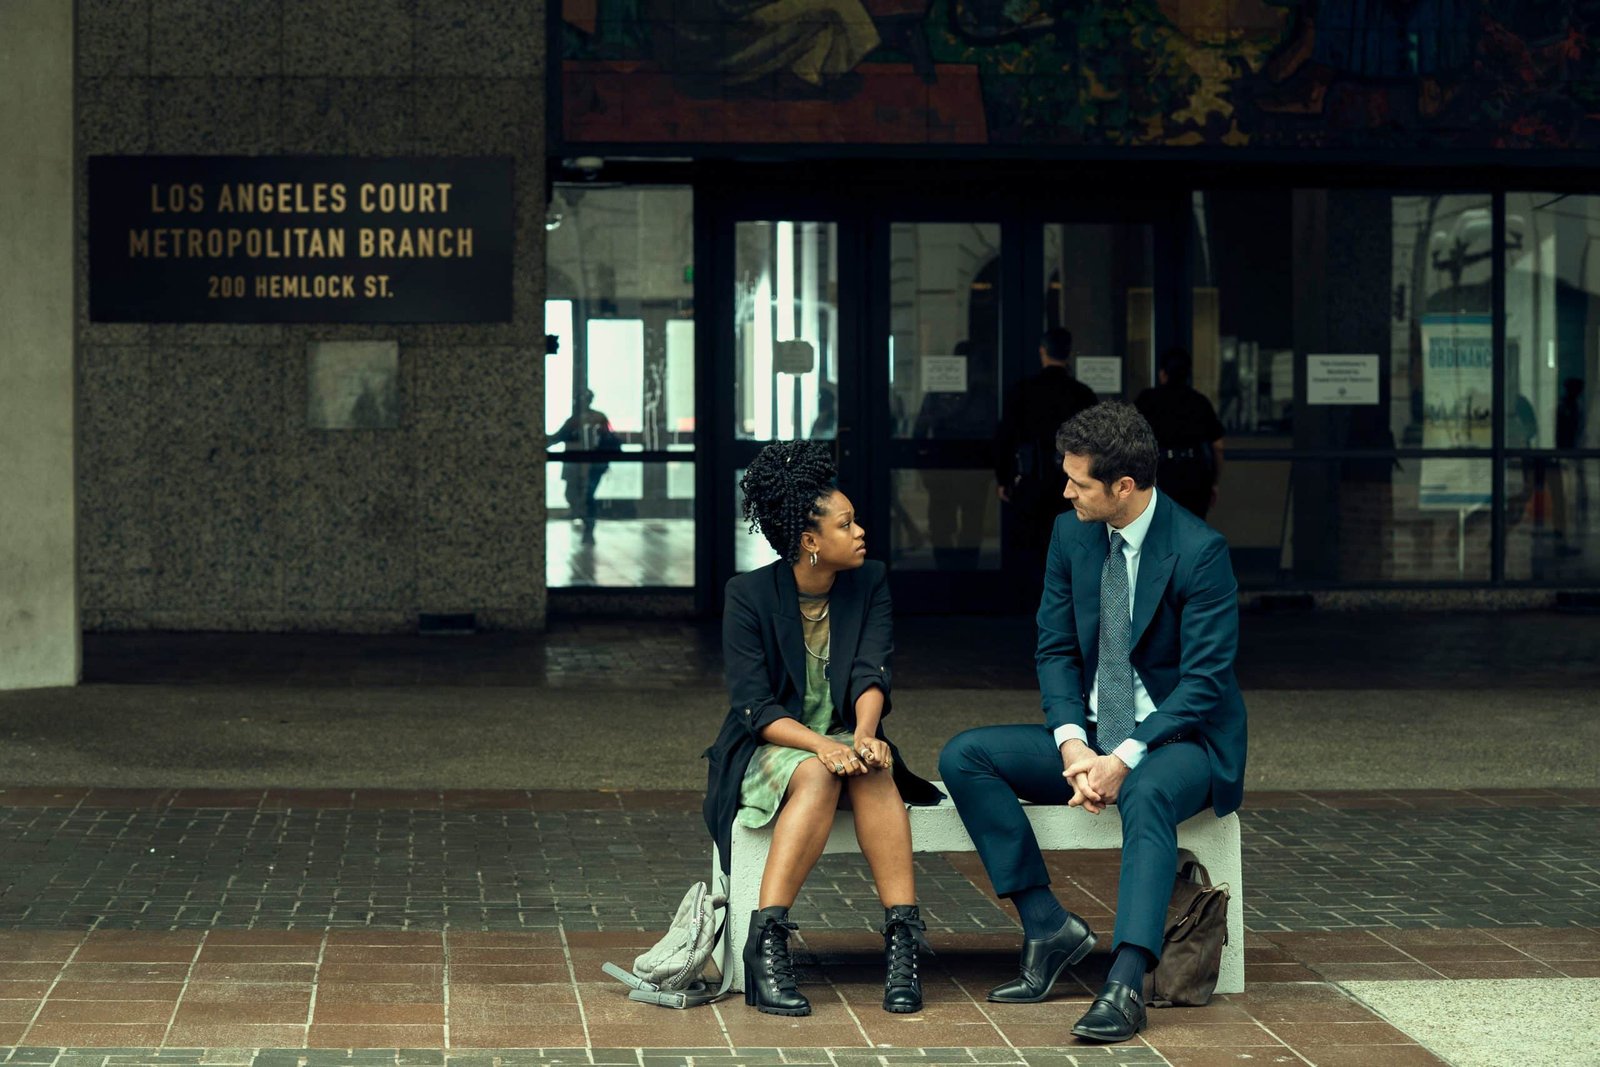 Jazz Raycole as Izzy and Manuel Garcia-Rulfo as Mickey Haller in The Lincoln Lawyer